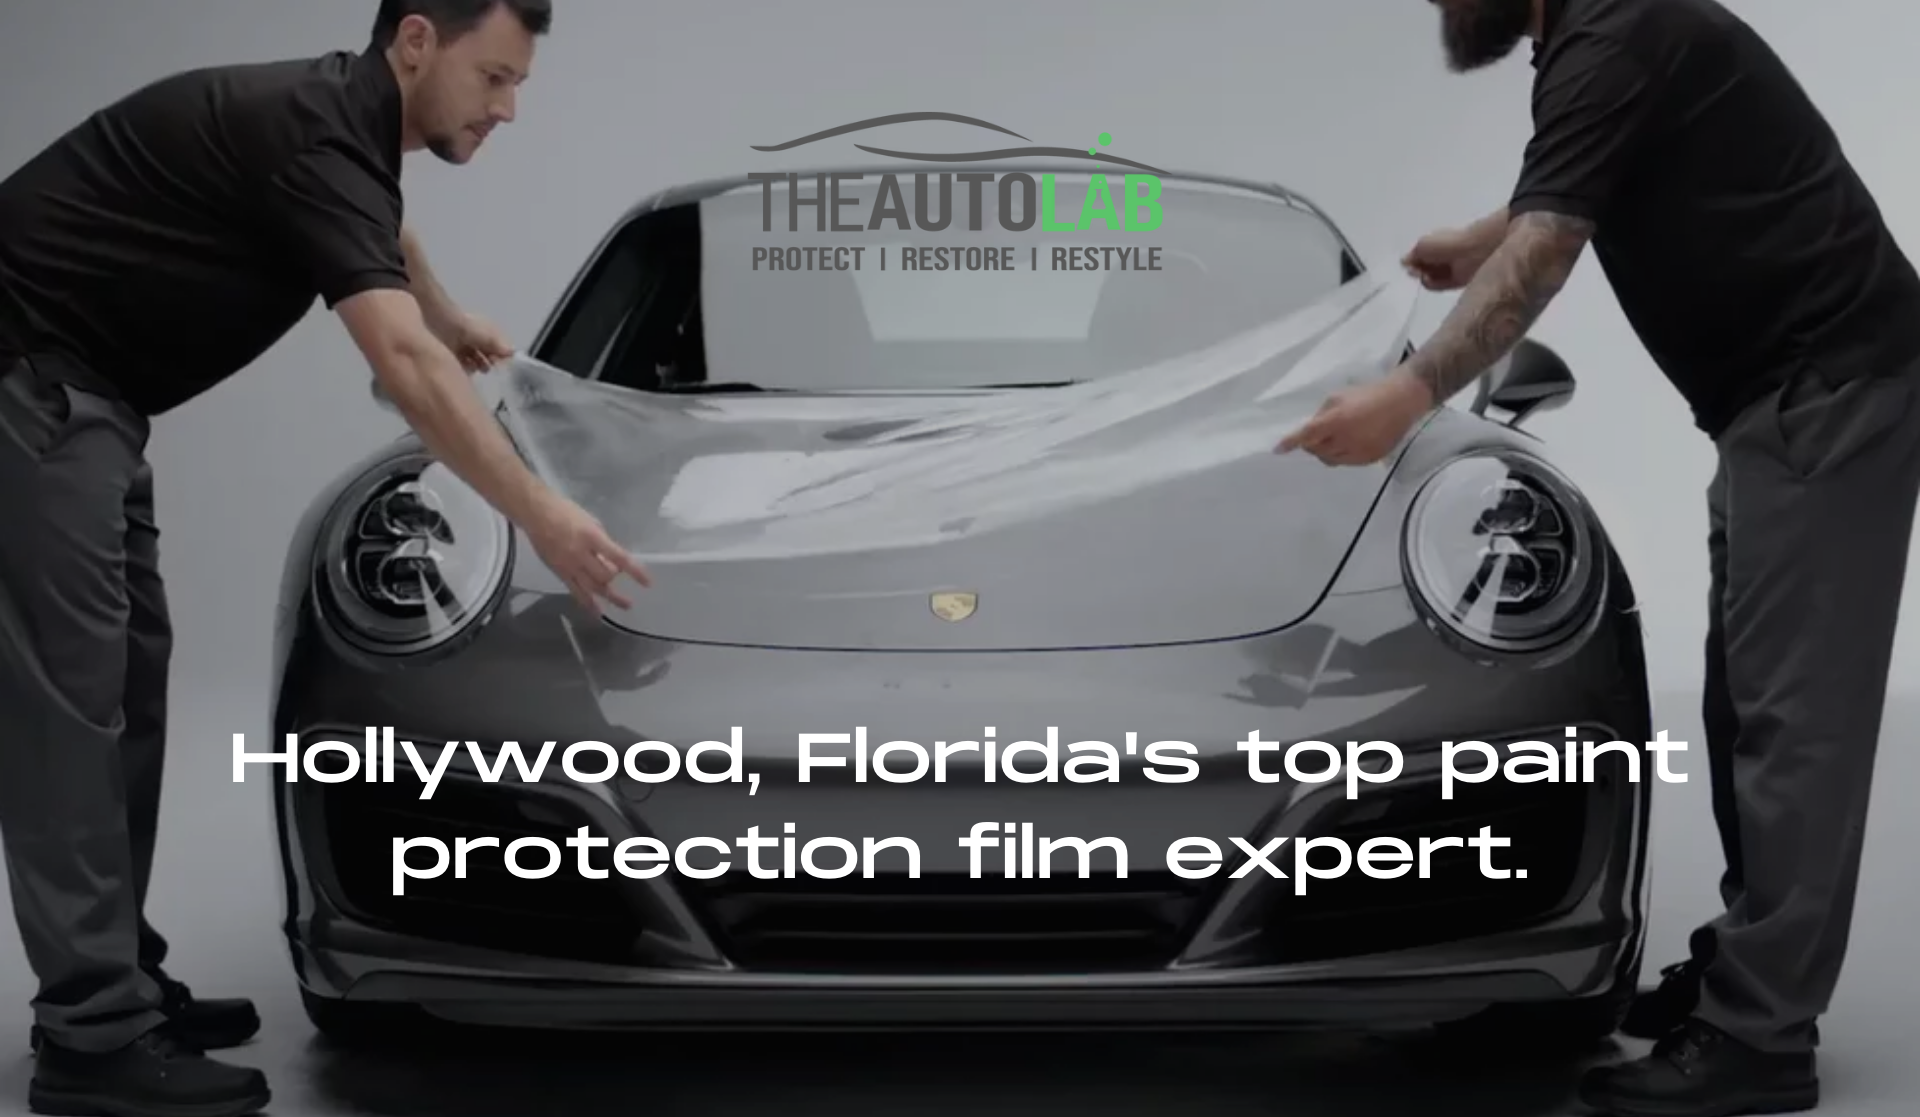 Load video: The auto lab Florida paint protection film installer